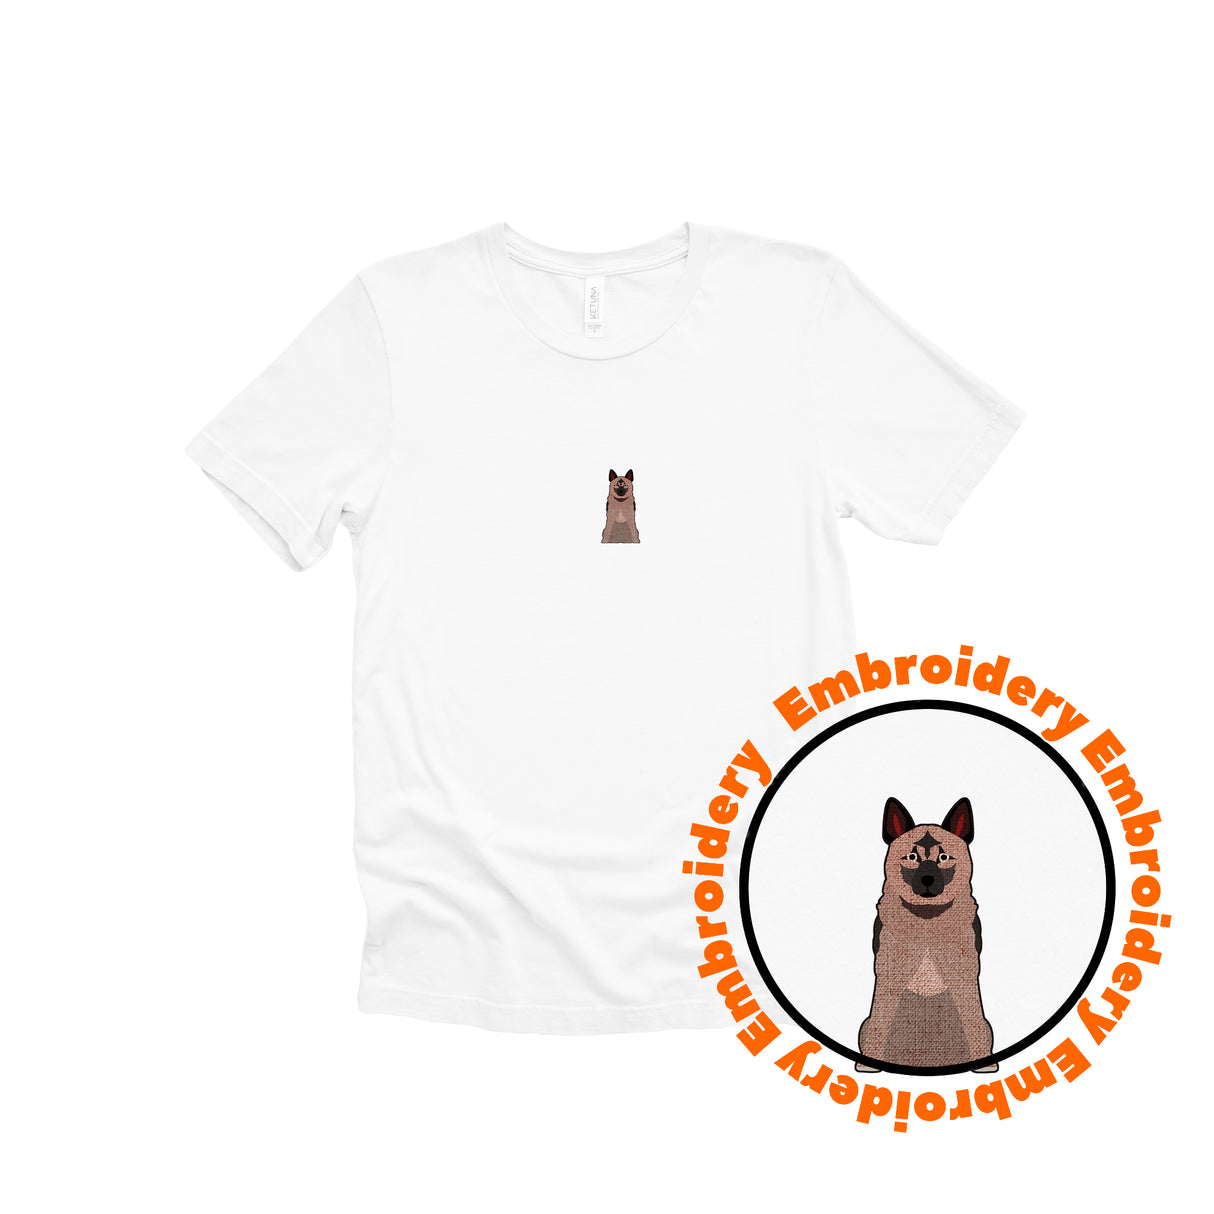 Norweigian Elkhound Embroidery Adult Unisex T-Shirt